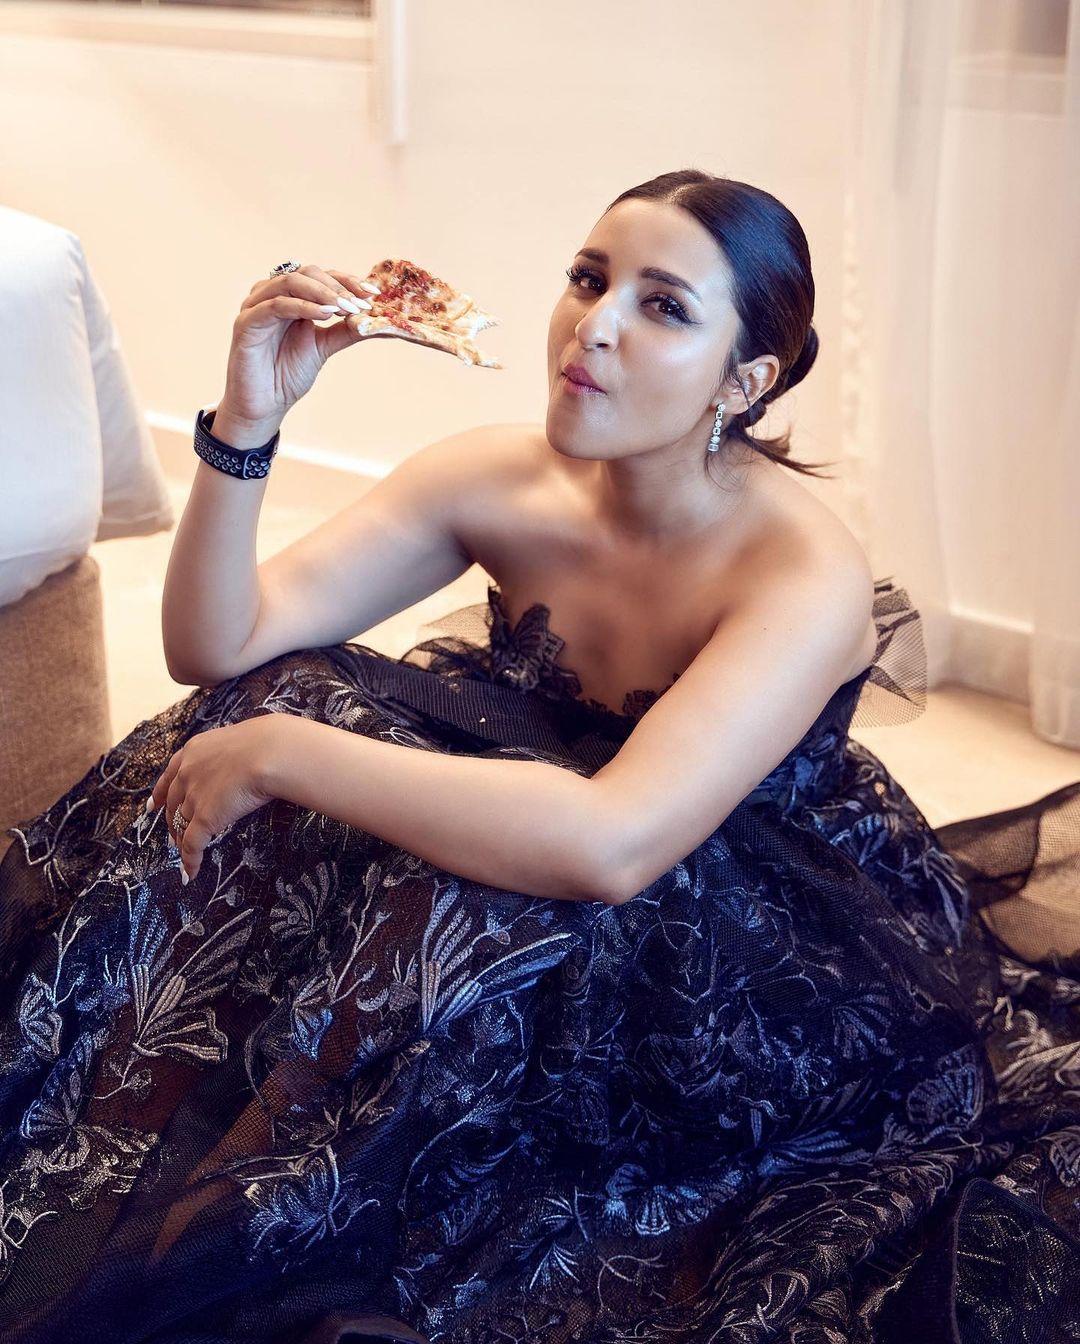 Parineeti Chopra set hearts on fire when she posted these snaps of herself looking gorgeous as she divulged in the post-show snack